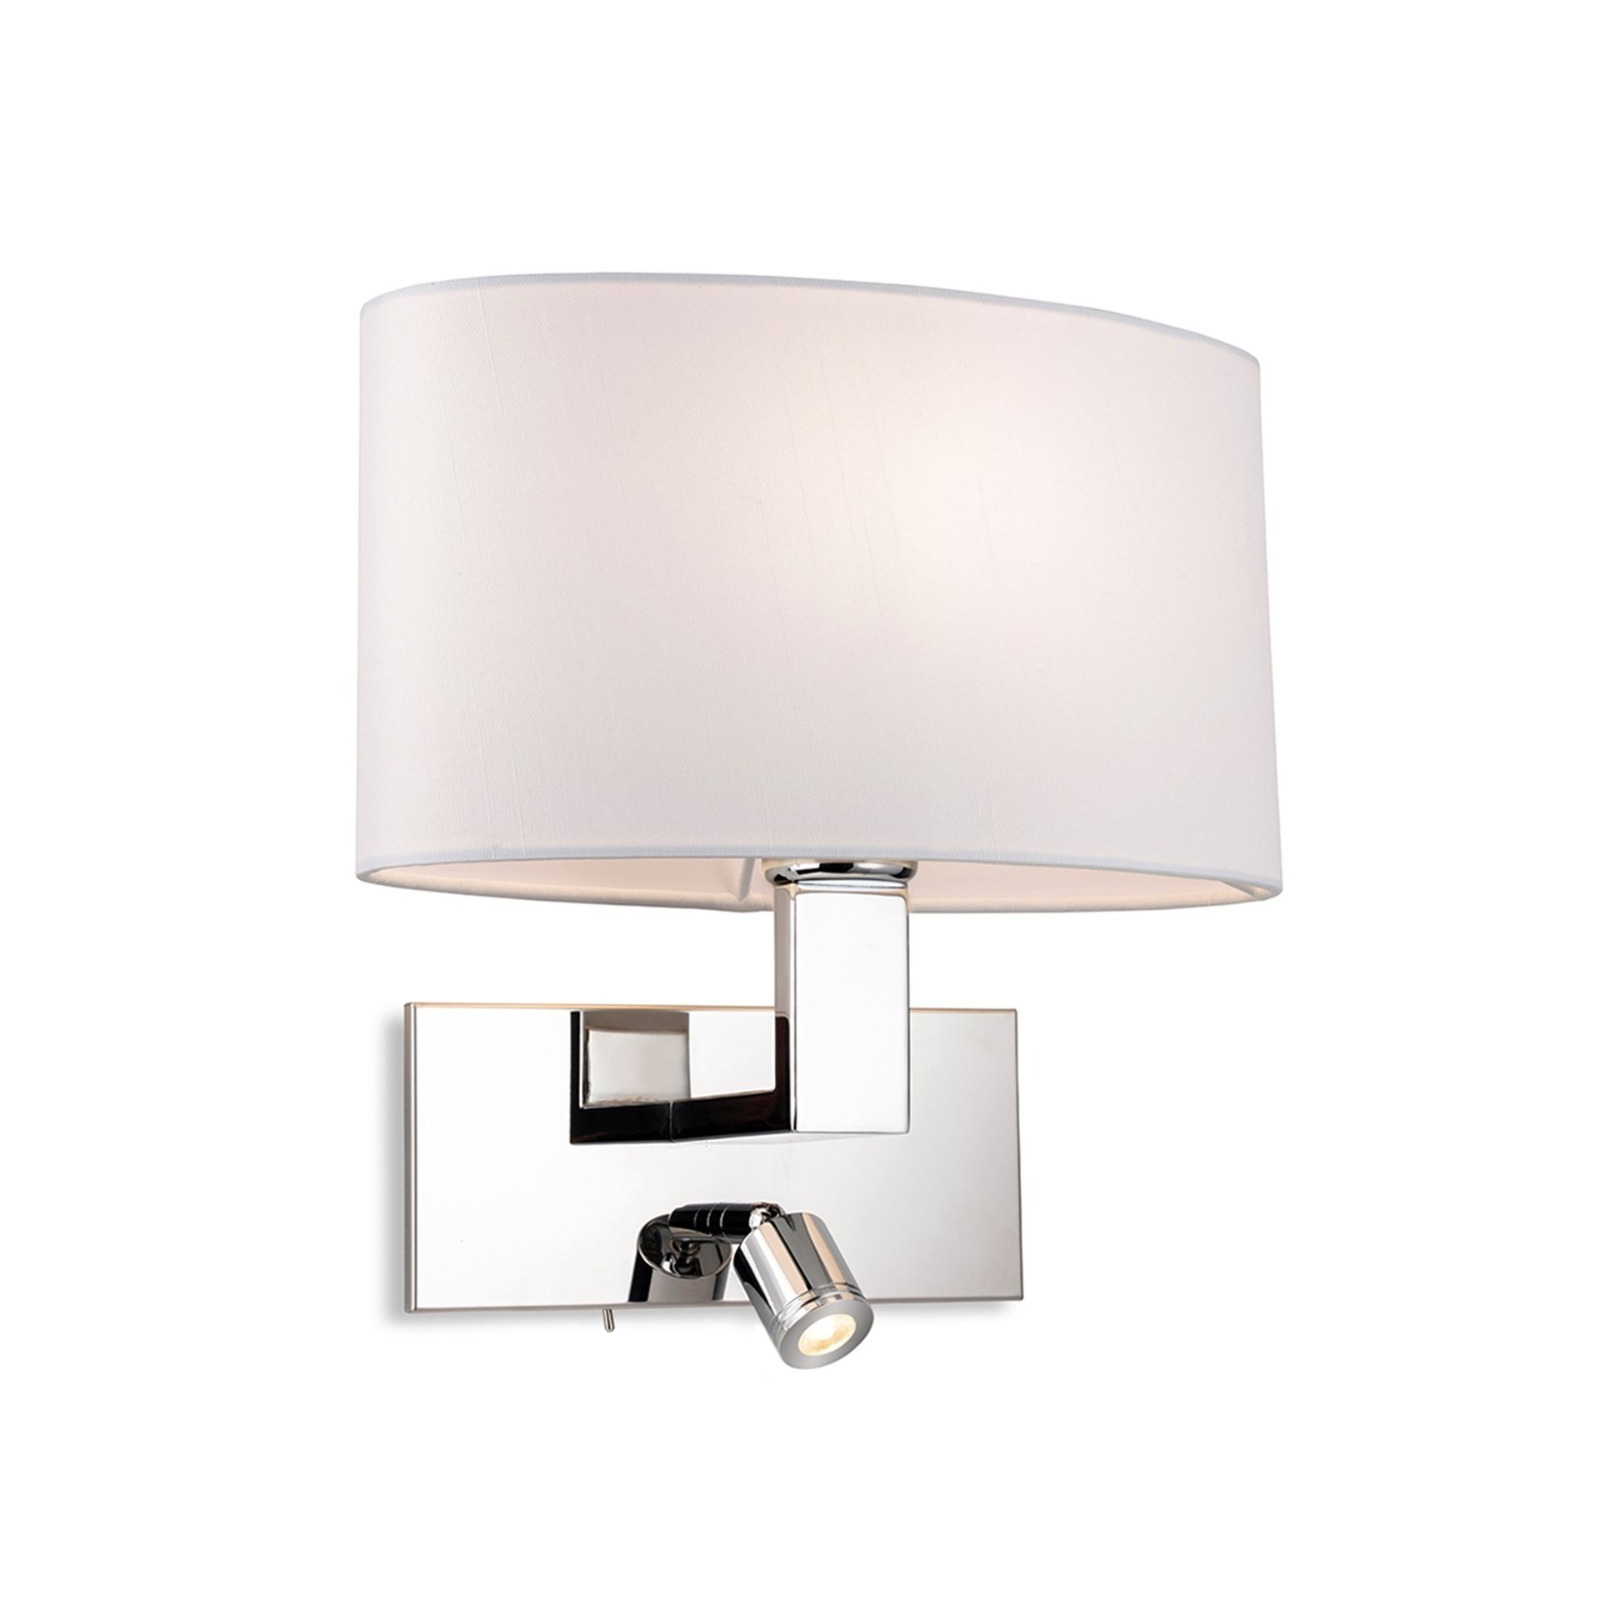 Firstlight 4938CH Webster 2 Light Switched Wall Light With Reading Light In Chrome With Cream Shade